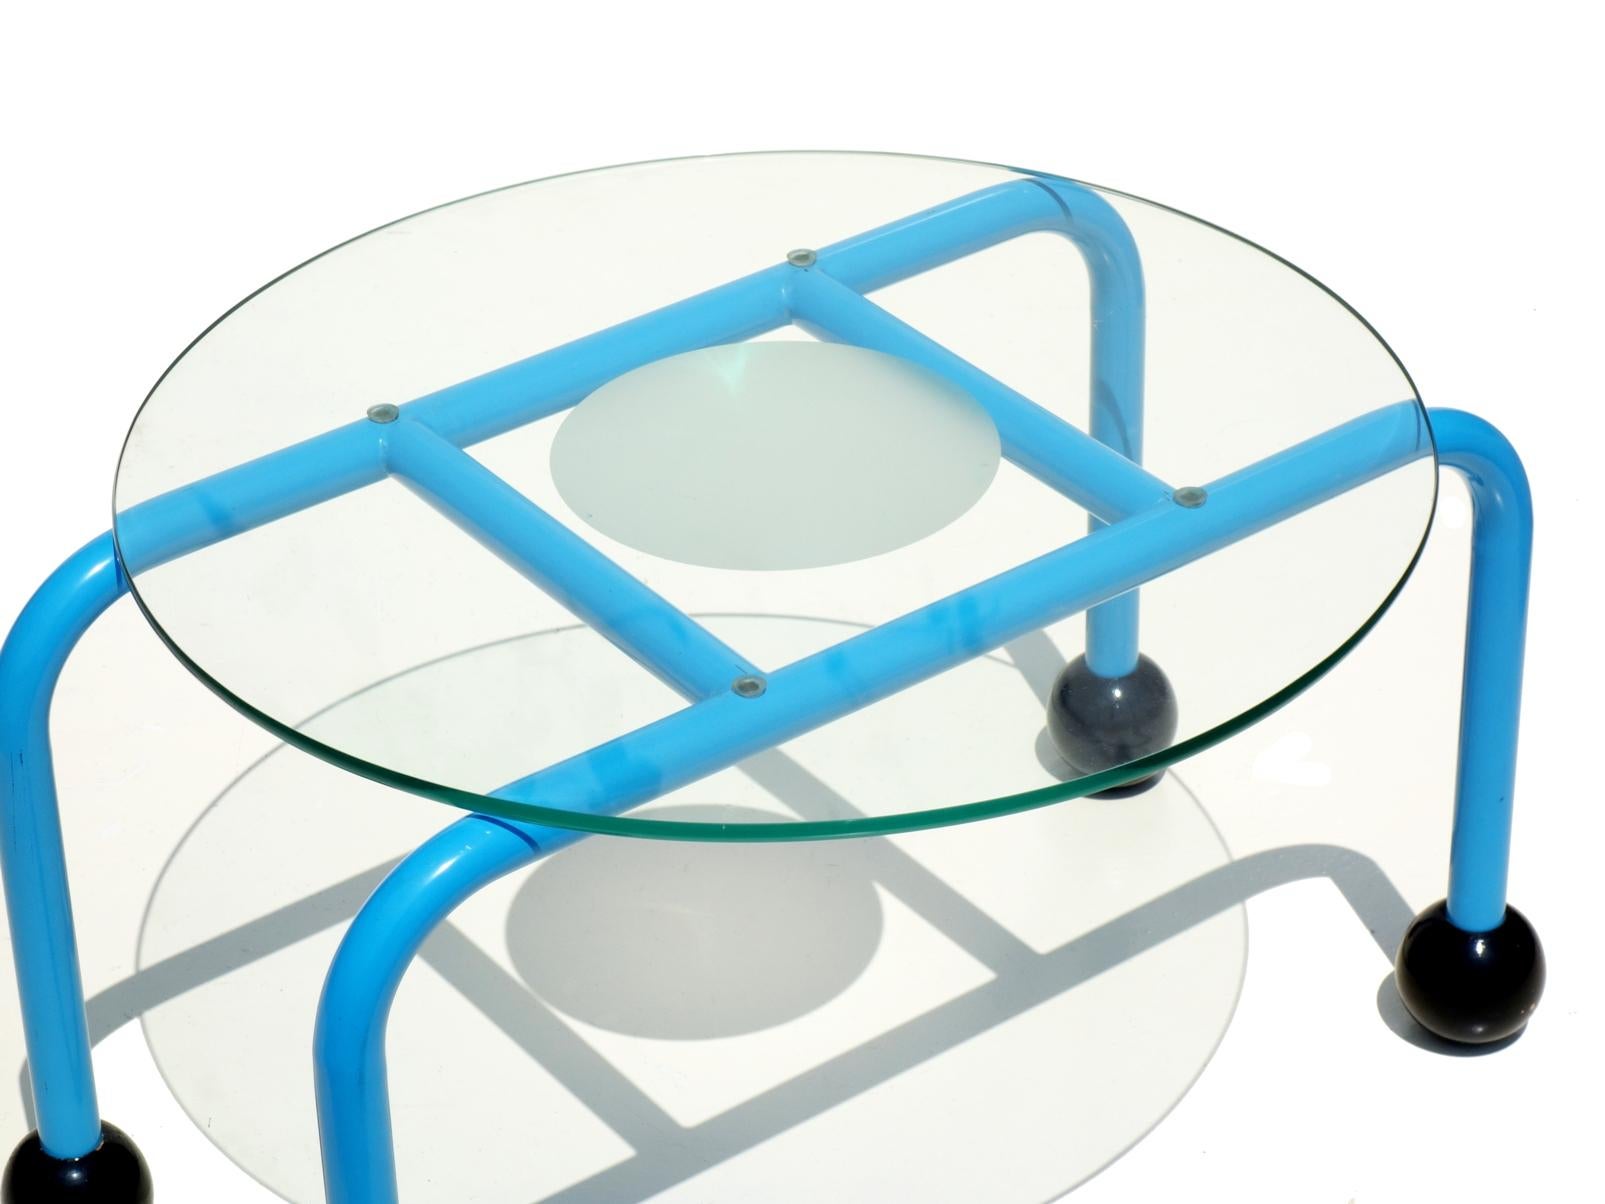 Nanda Vigo, coffee table.
Glass Design Macherio, 1981

Enameled metal frame with wood feet
Crystal top.
Excellent condiction
Available bibliography